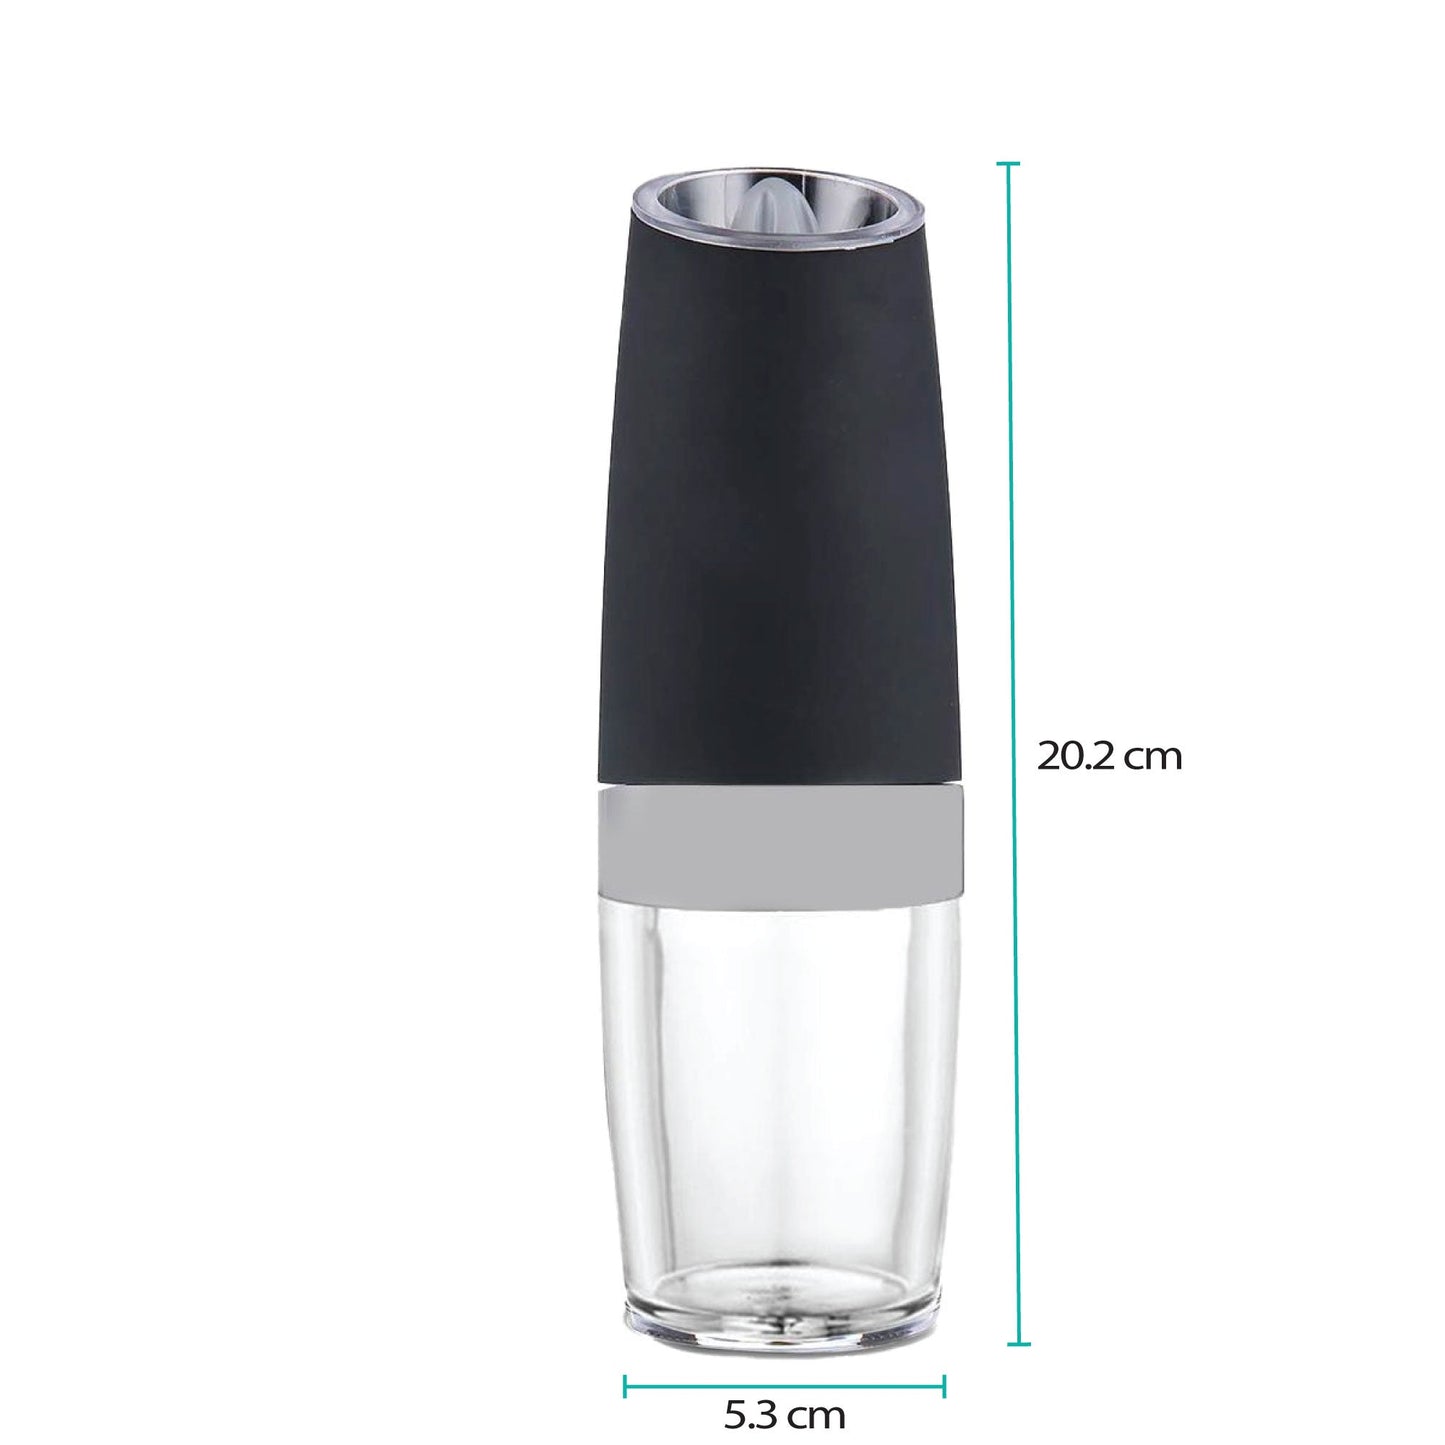 Automatic Gravity Electric Salt and Pepper Grinder - Battery Operated Shaker Mill